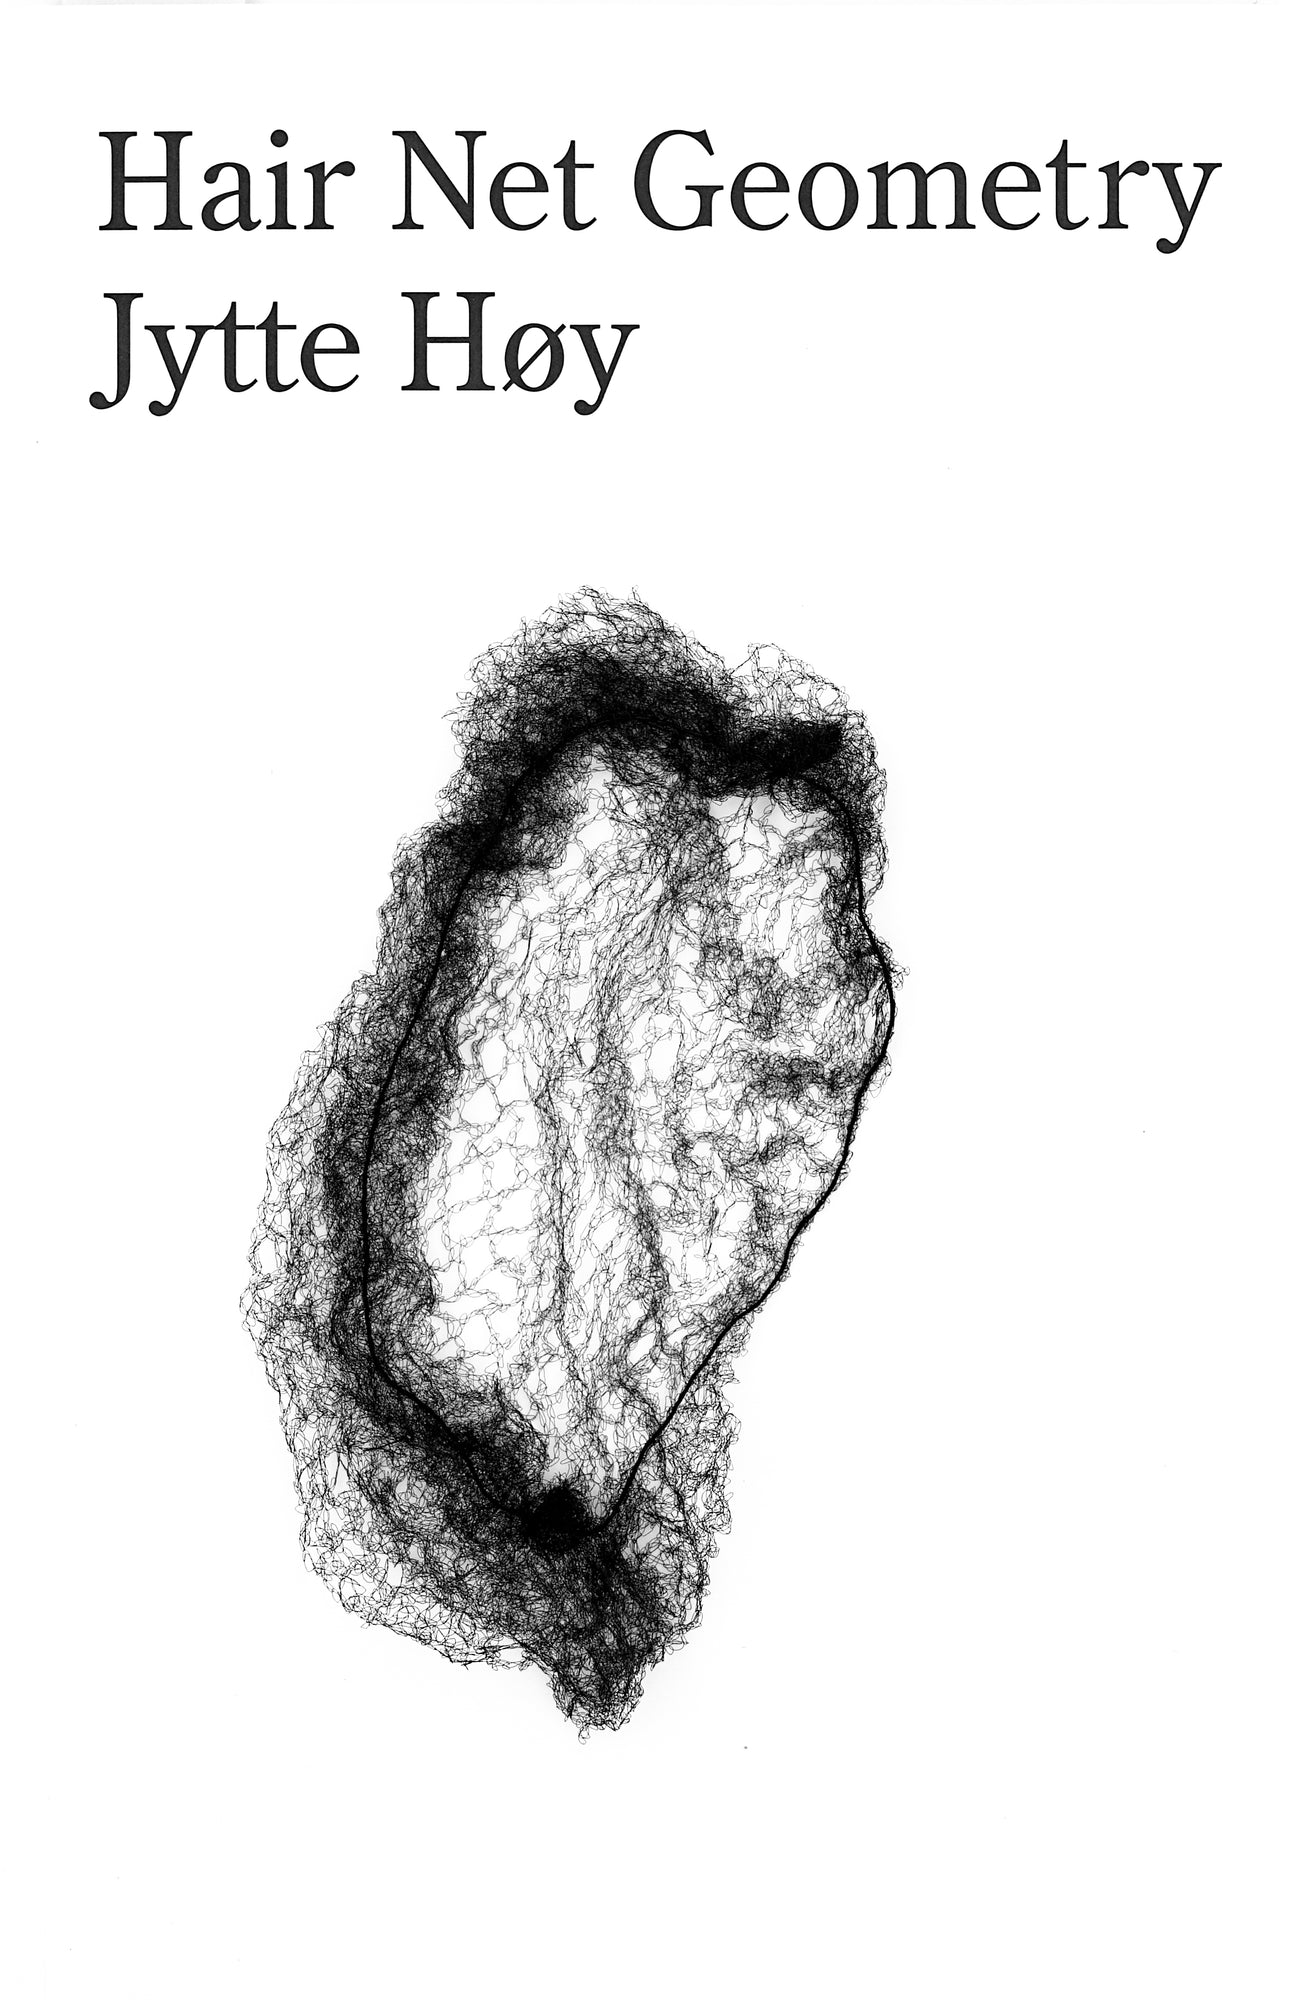 Book cover with white background and the title Hair Net Geometry and author Jytte Høy in black serif writing on upper half of the page. Underneath it is a black and white delicate drawing of a hair net.